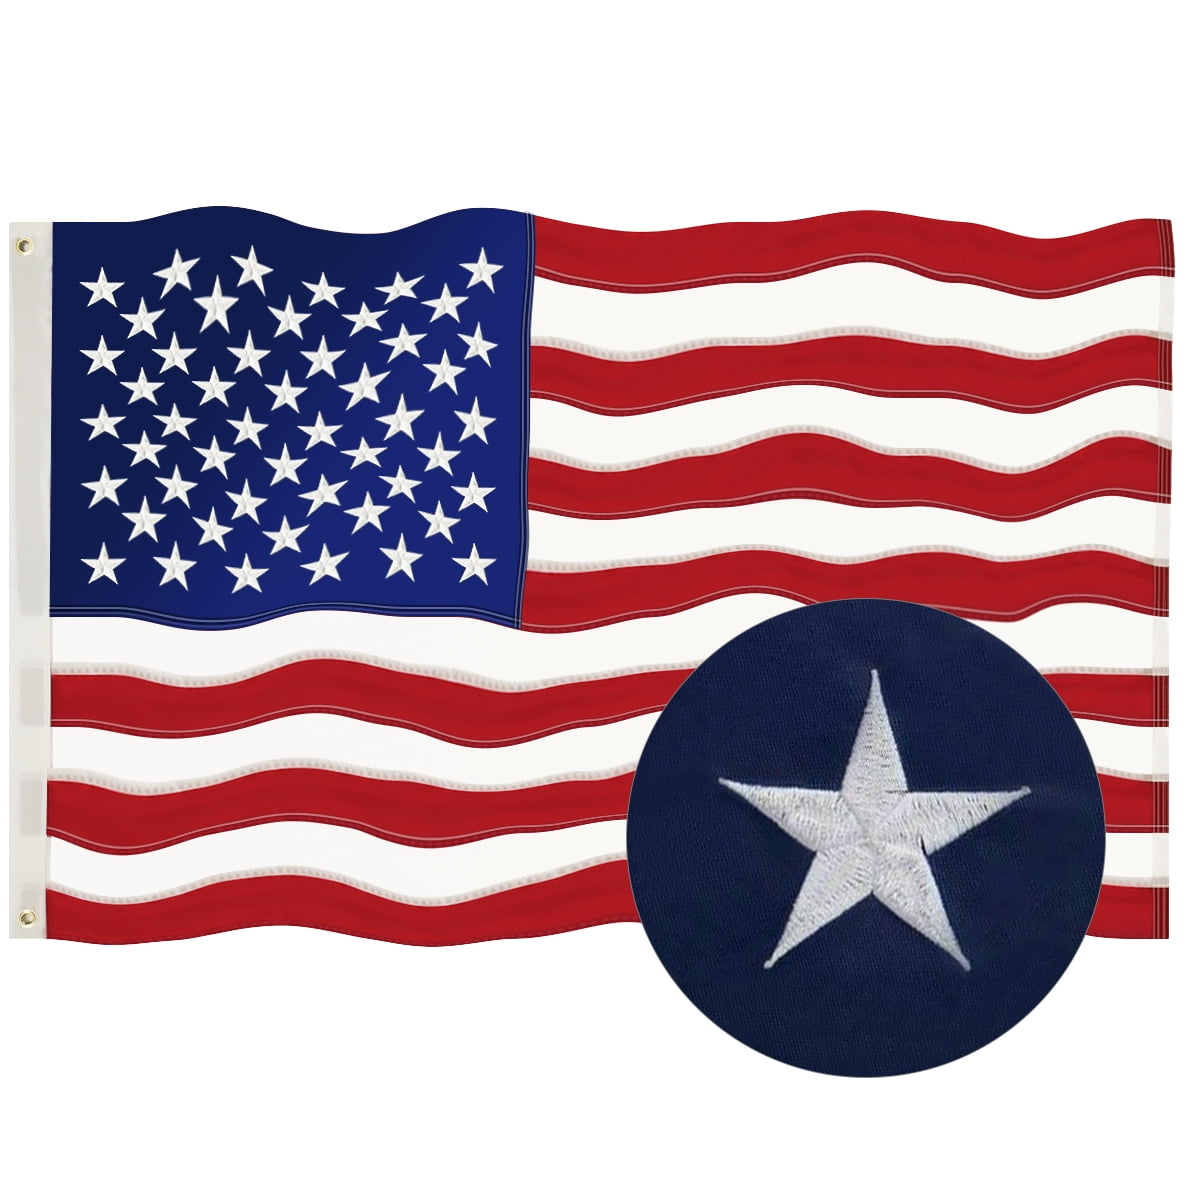 Texas State Flag G128 Indoor/Outdoor Embroidered 210D 2x3 feet Quality Polyester Vibrant Colors Brass Grommets 